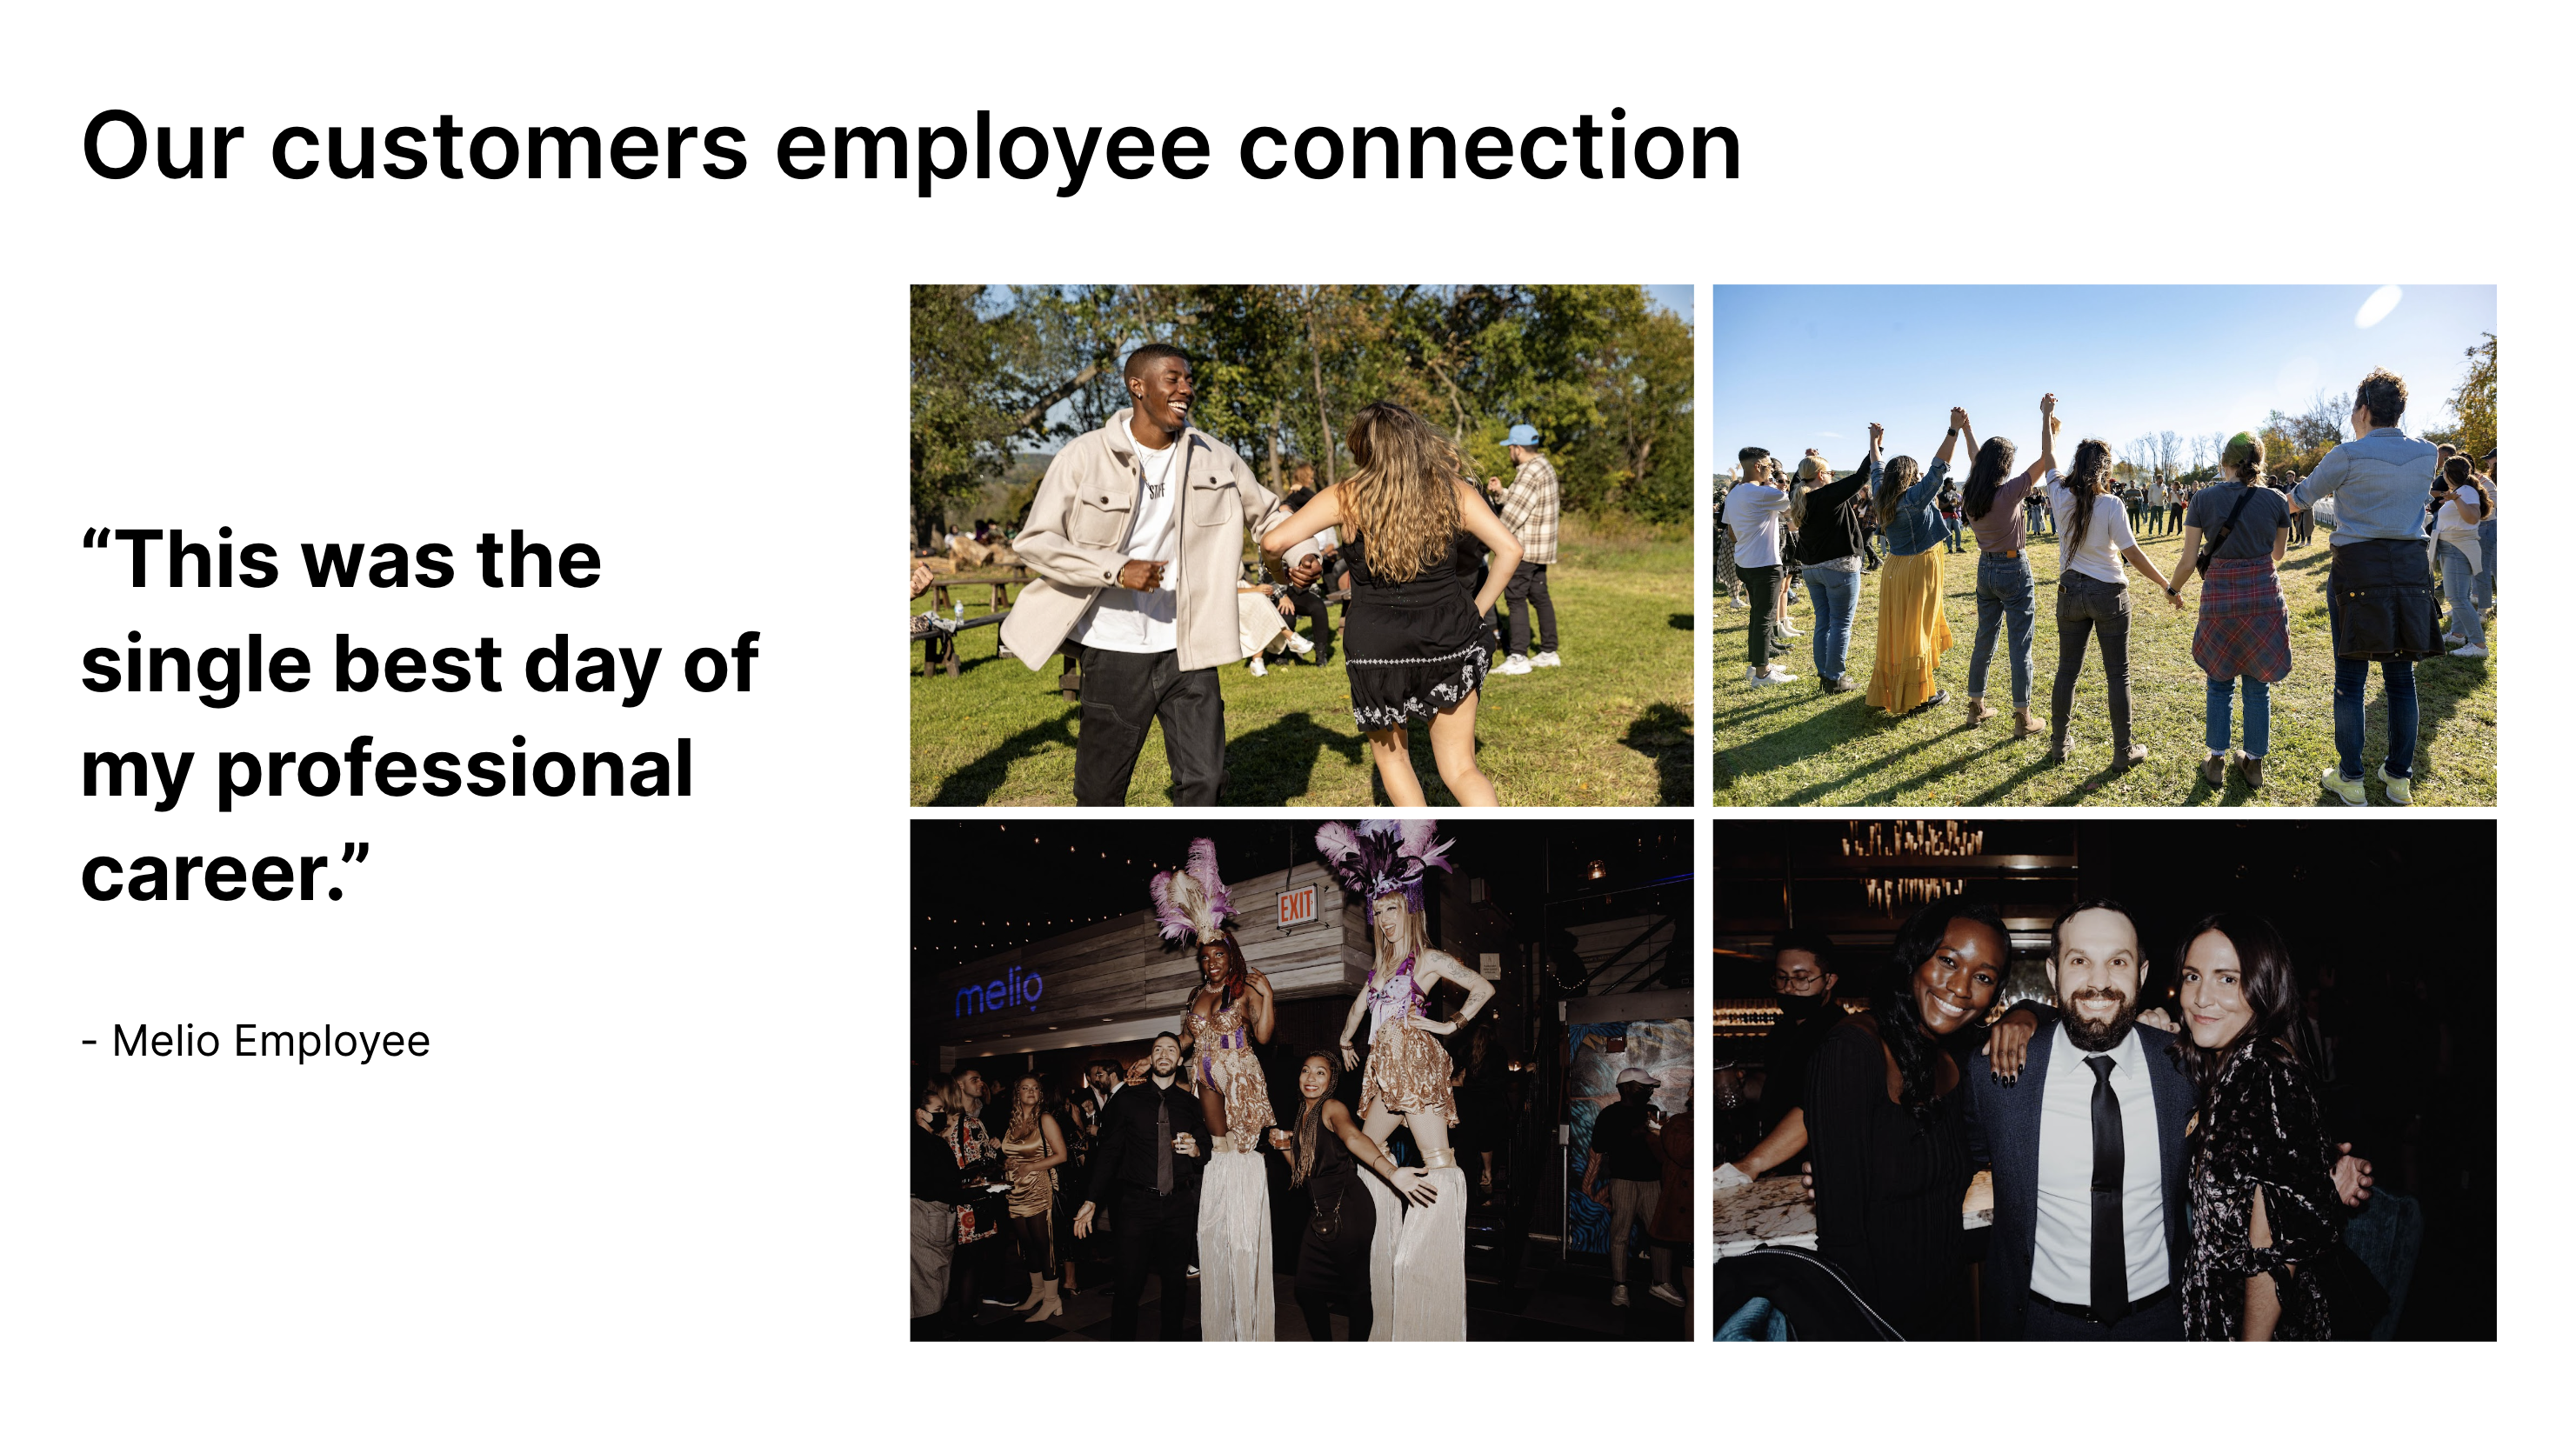 Customers employee connection